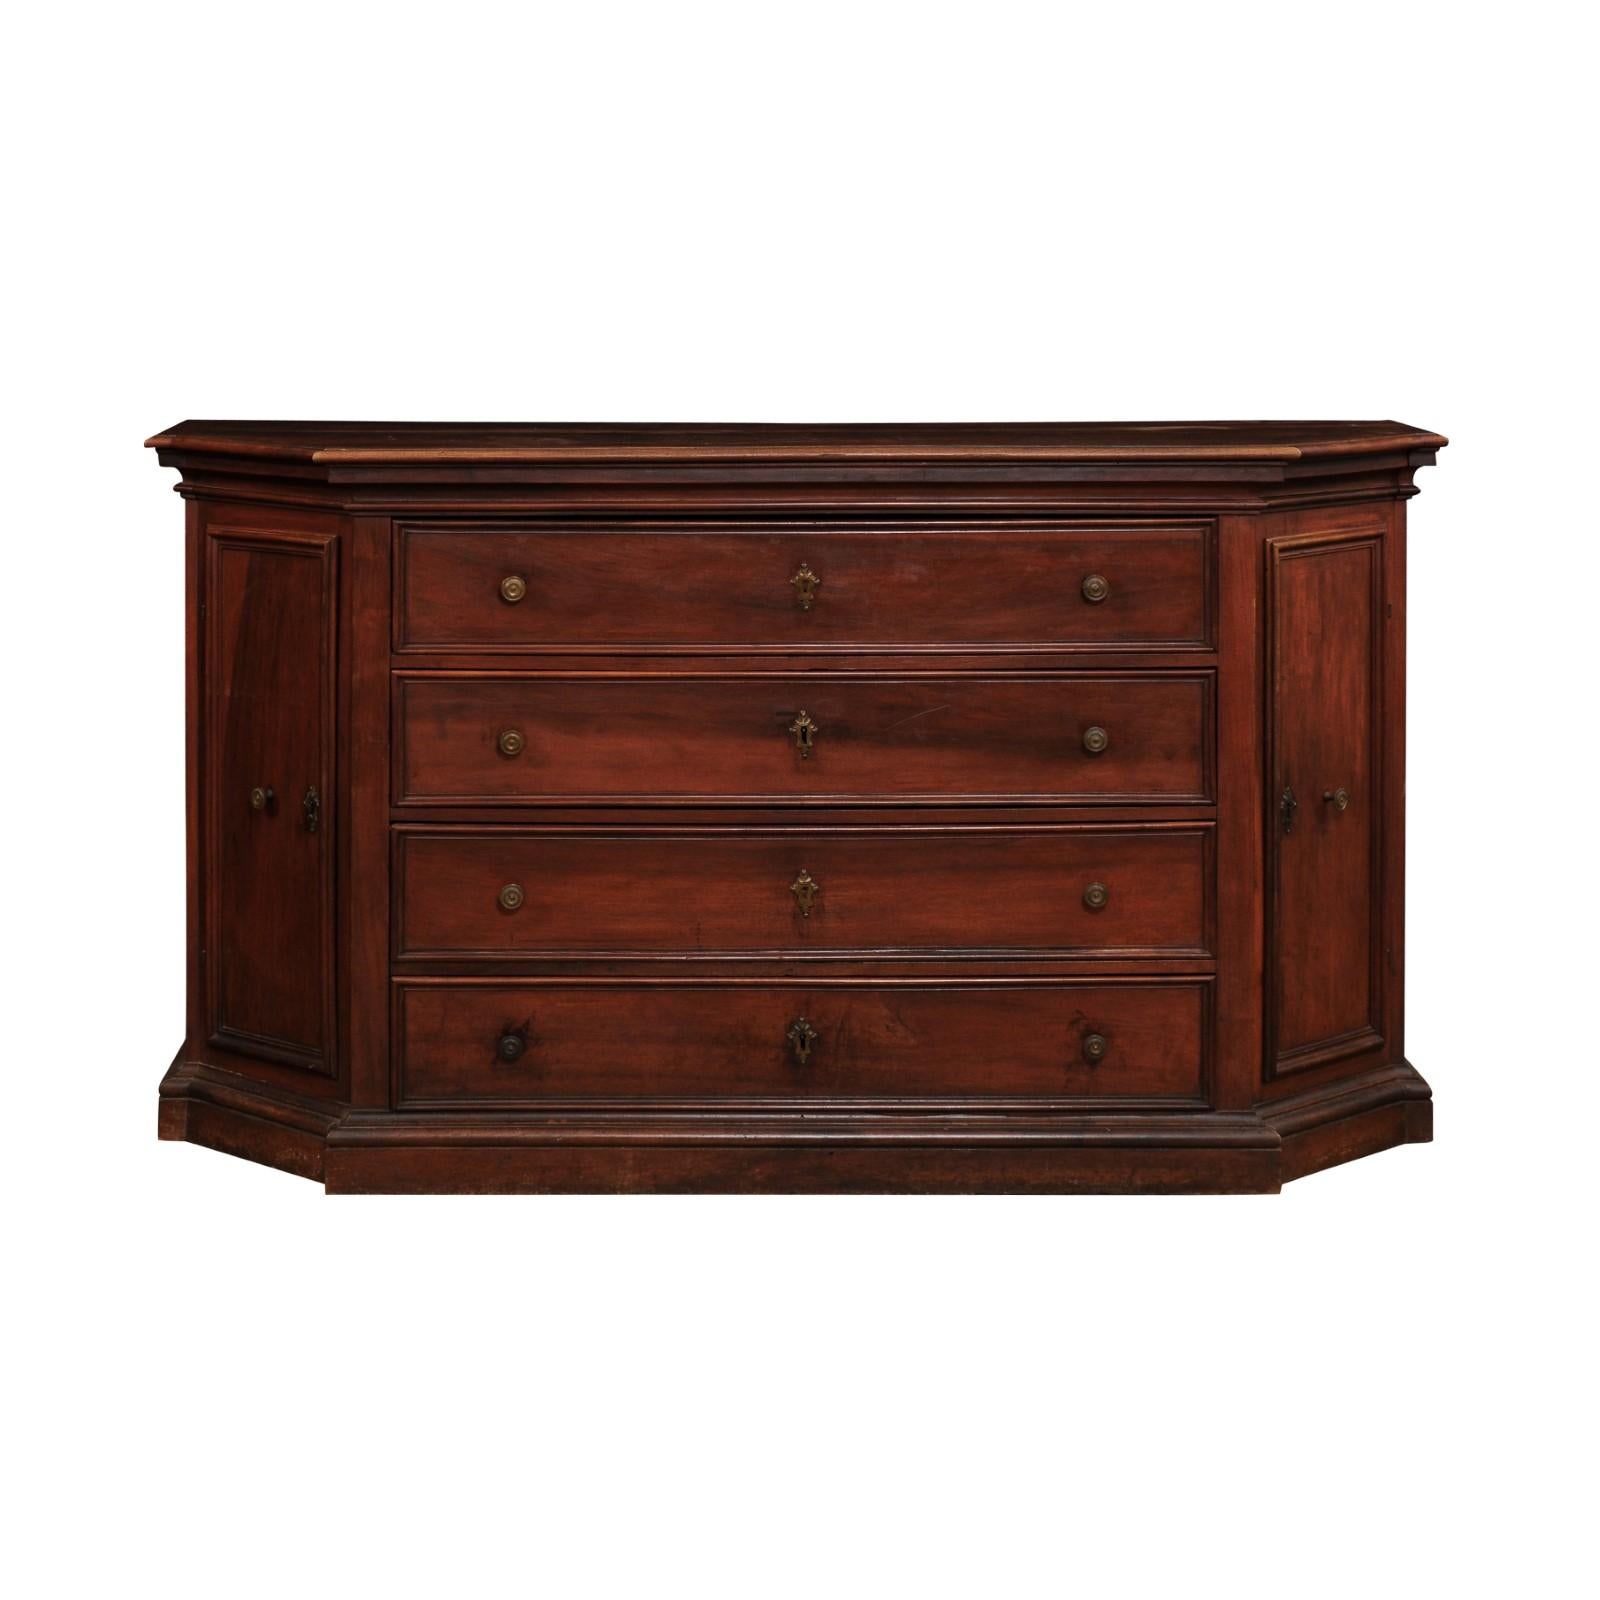 An Italian walnut dresser from the 17th century with four drawers, canted sides with doors, molded accents and rustic character. Created in Italy during the 17th century, this walnut dresser features a rectangular top with canted sides and